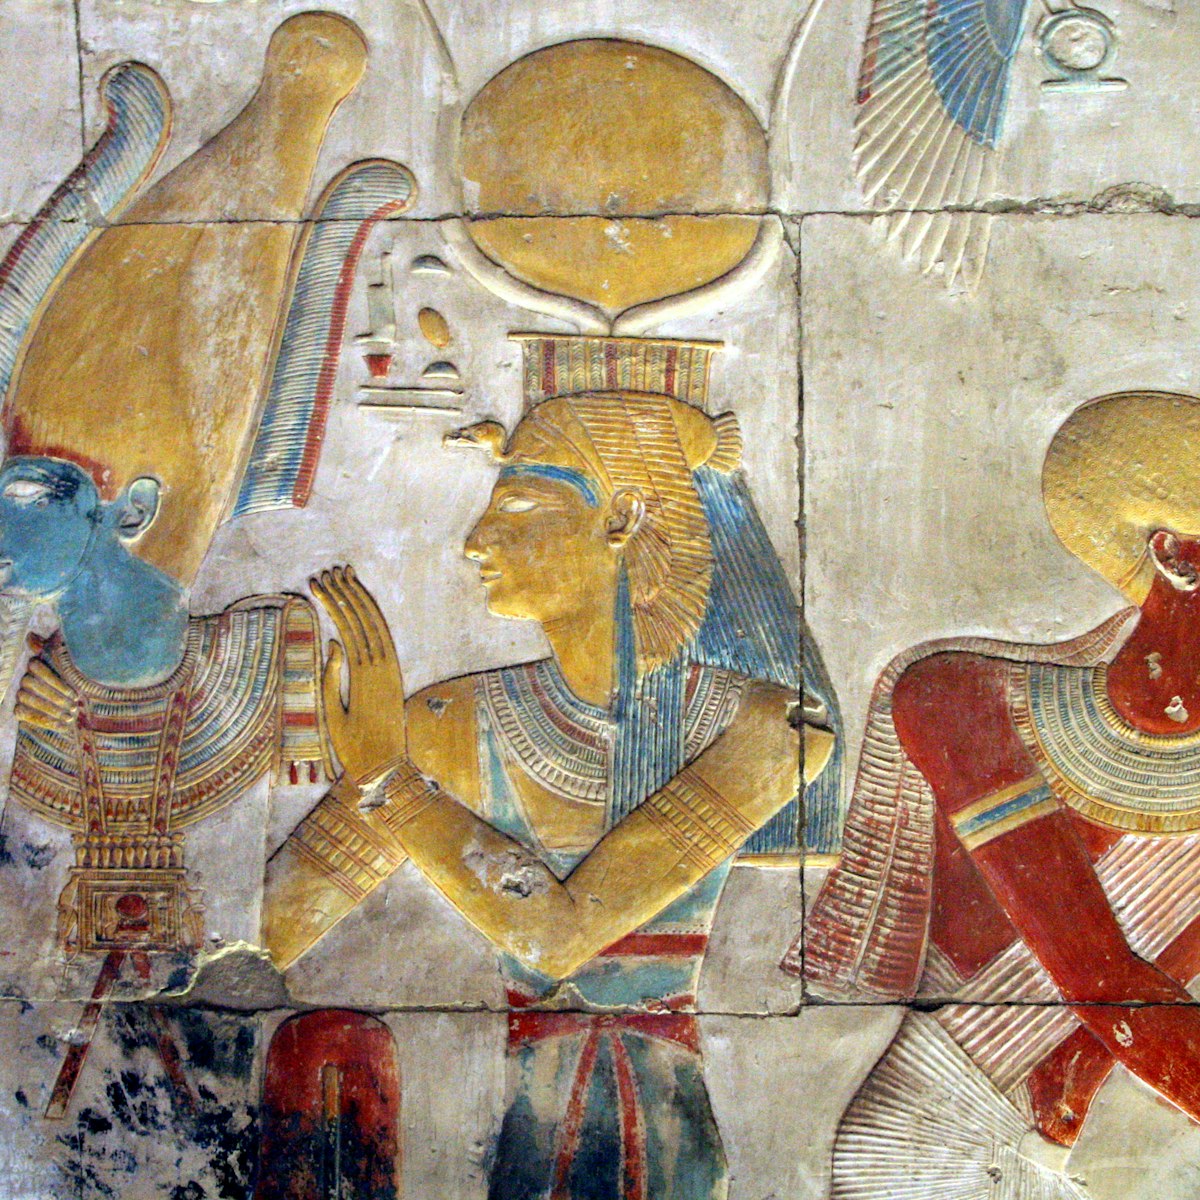 Painted bas relief of Osiris and Isis wearing the headdress of Hathor at the Temple of Seti I.
160374862
Abydos; Art And Craft; AutotagModeratelyStock - Do Not Delete; Bas Relief; Close-up; Color Image; Creativity; Egypt; Female Likeness; Flickr; Hathor; Headdress; History; Horizontal; Human Representation; Indoors; Isis - Egyptian Goddess; Male Likeness; Middle East; No People; Osiris; Paintings; Photography; Religion; Seti I; sohag governorate; Temple - Building; The Past; Wall - Building Feature;